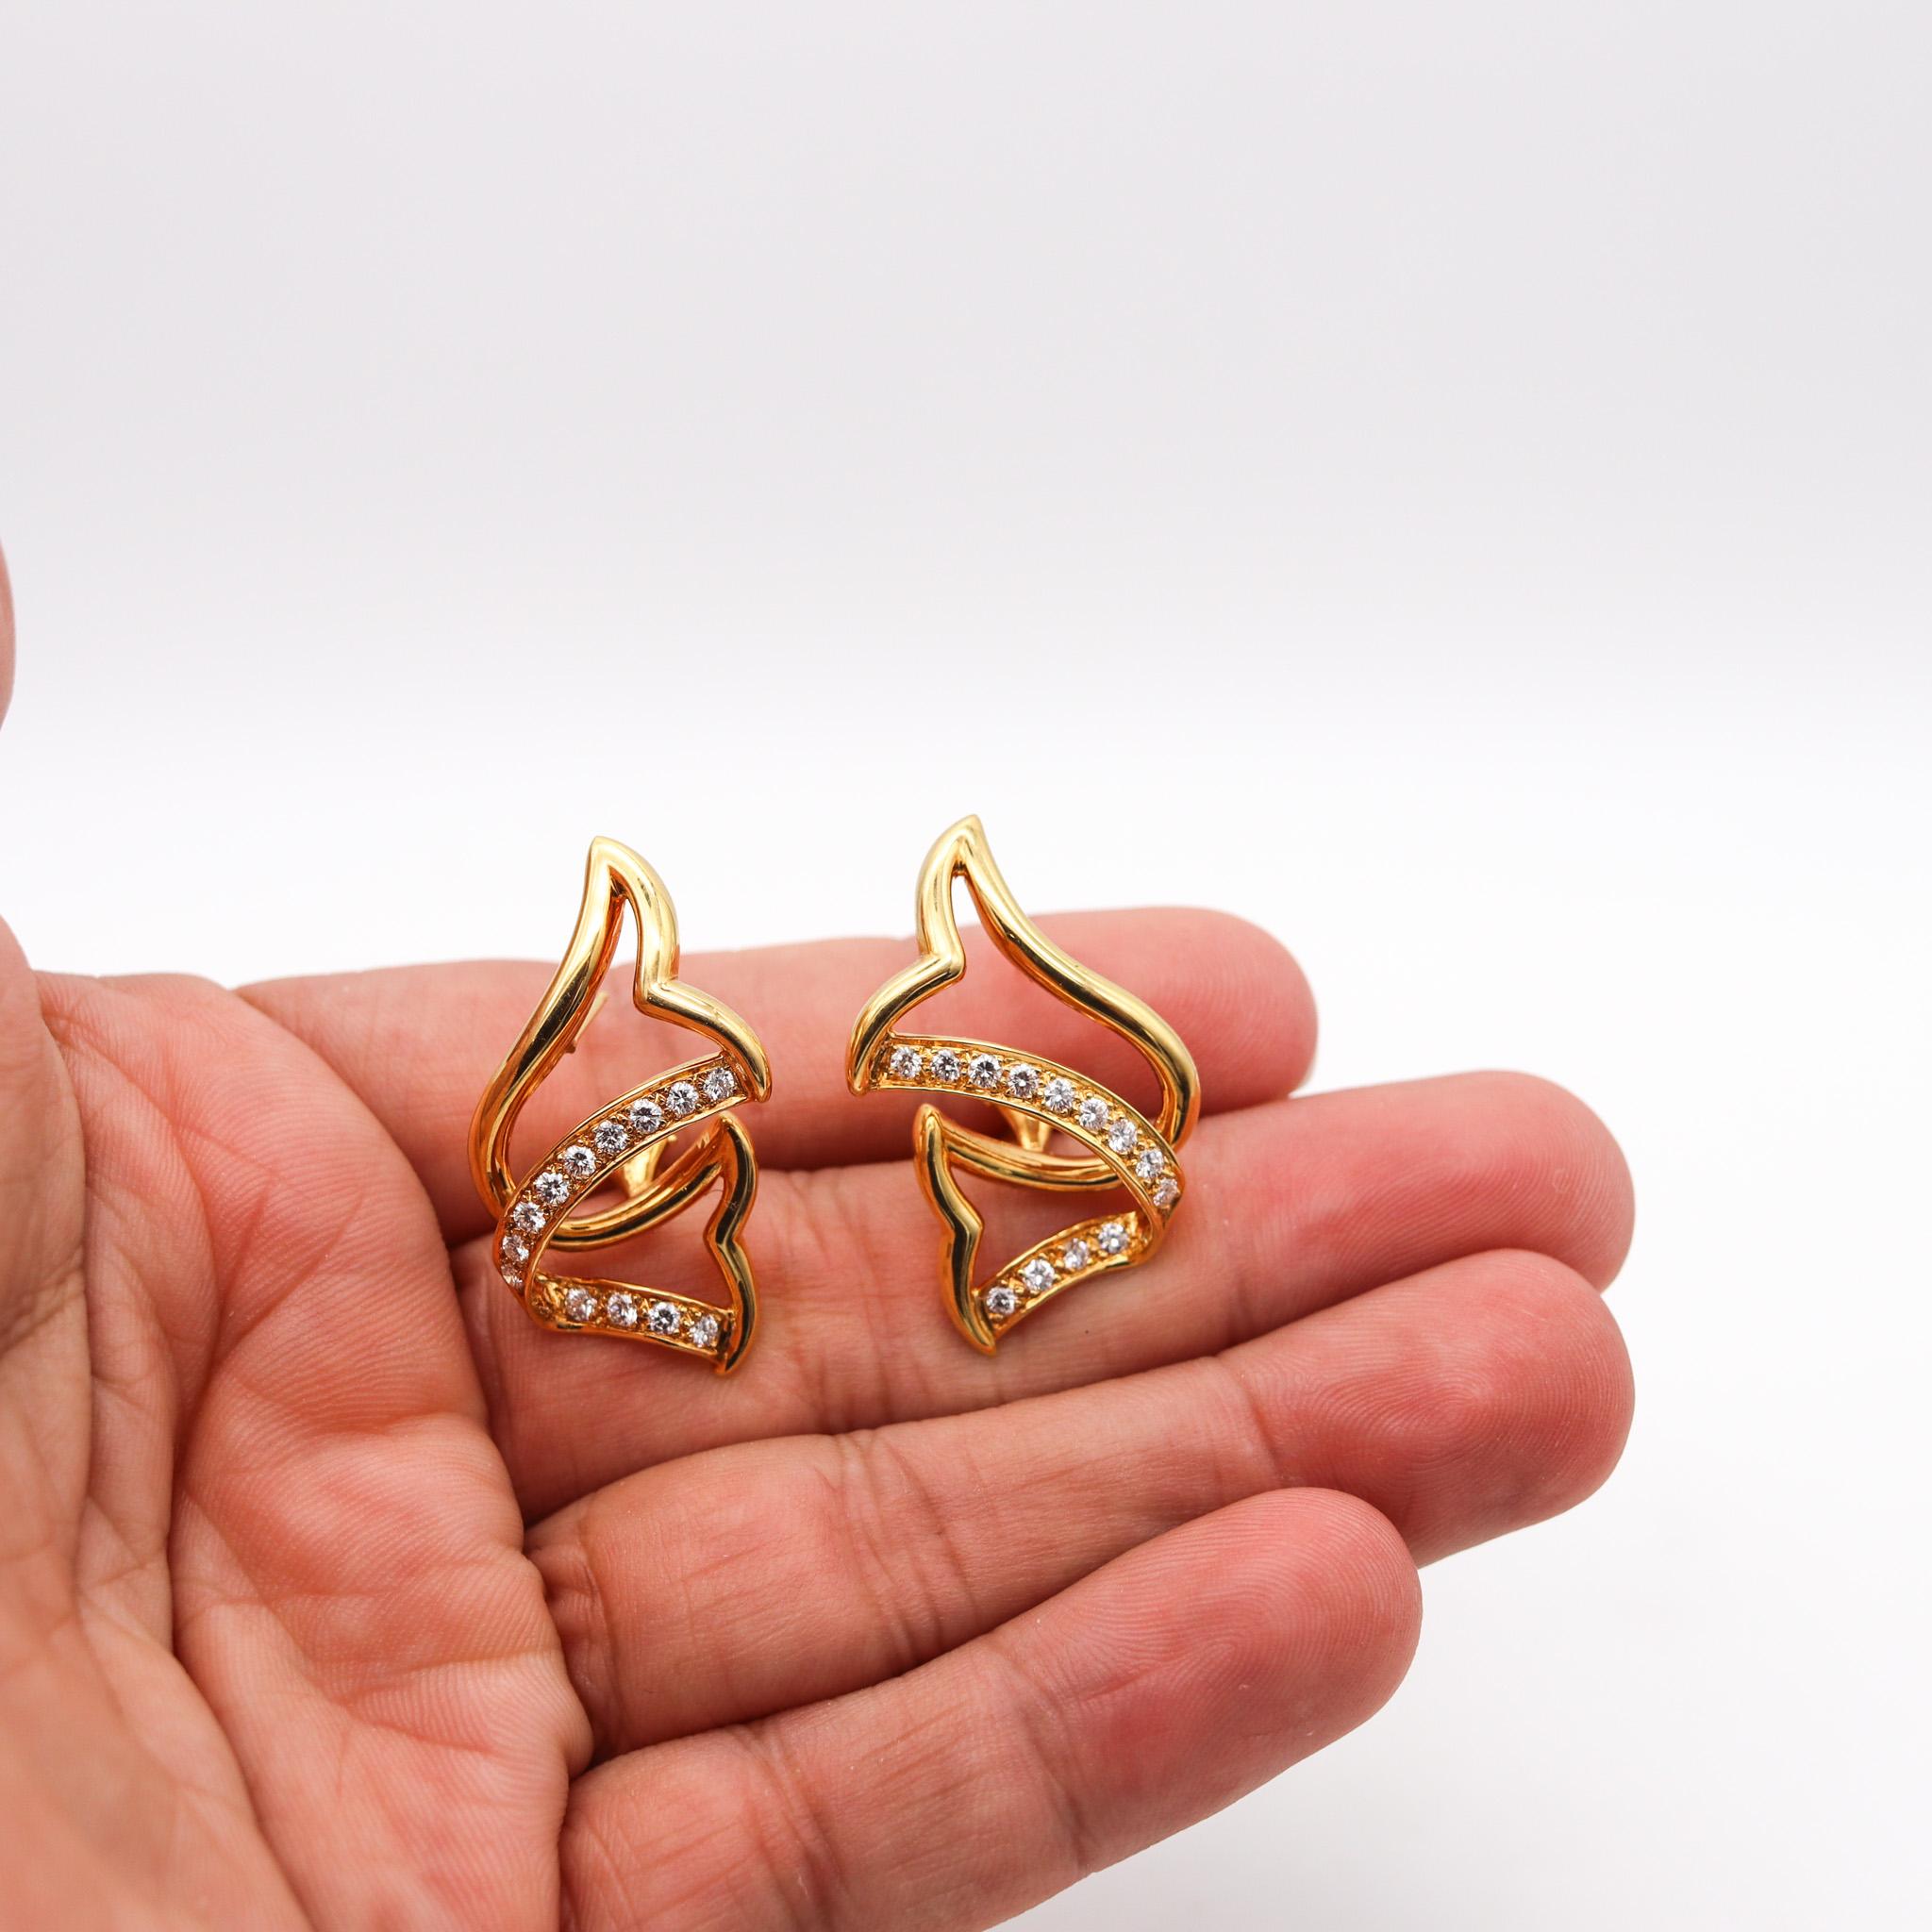 Sonia Bitton Sculptural Free Form Earrings In 18Kt Gold With 1.58 Ctw Diamonds In Excellent Condition For Sale In Miami, FL